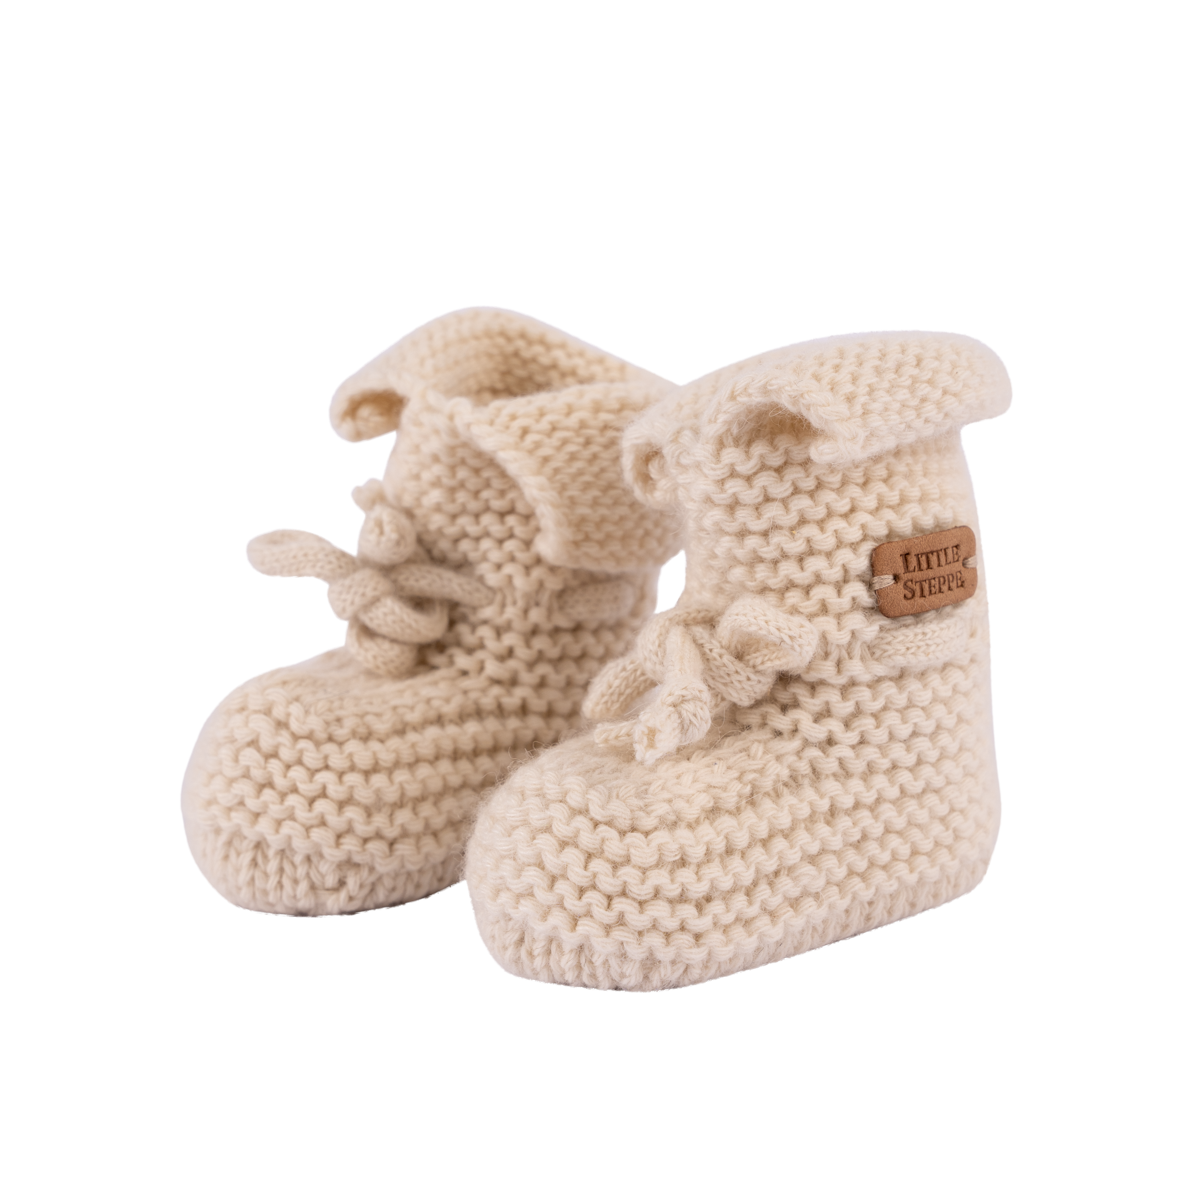 "Robyn" Wool Baby Booties